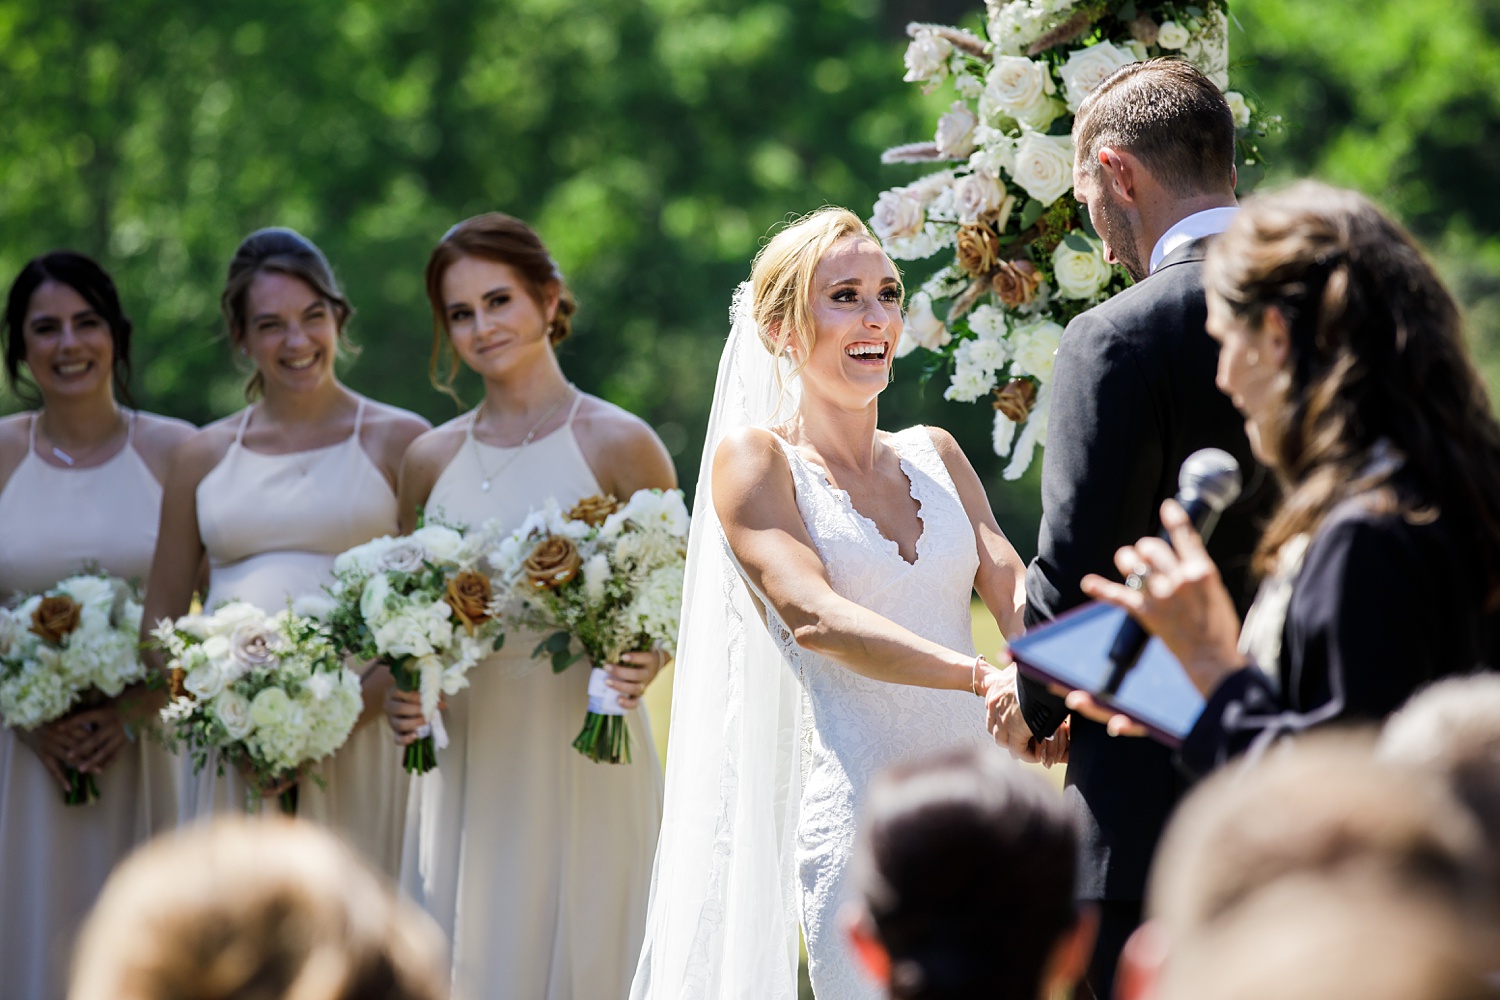 The bride laughs during the wedding ceremony